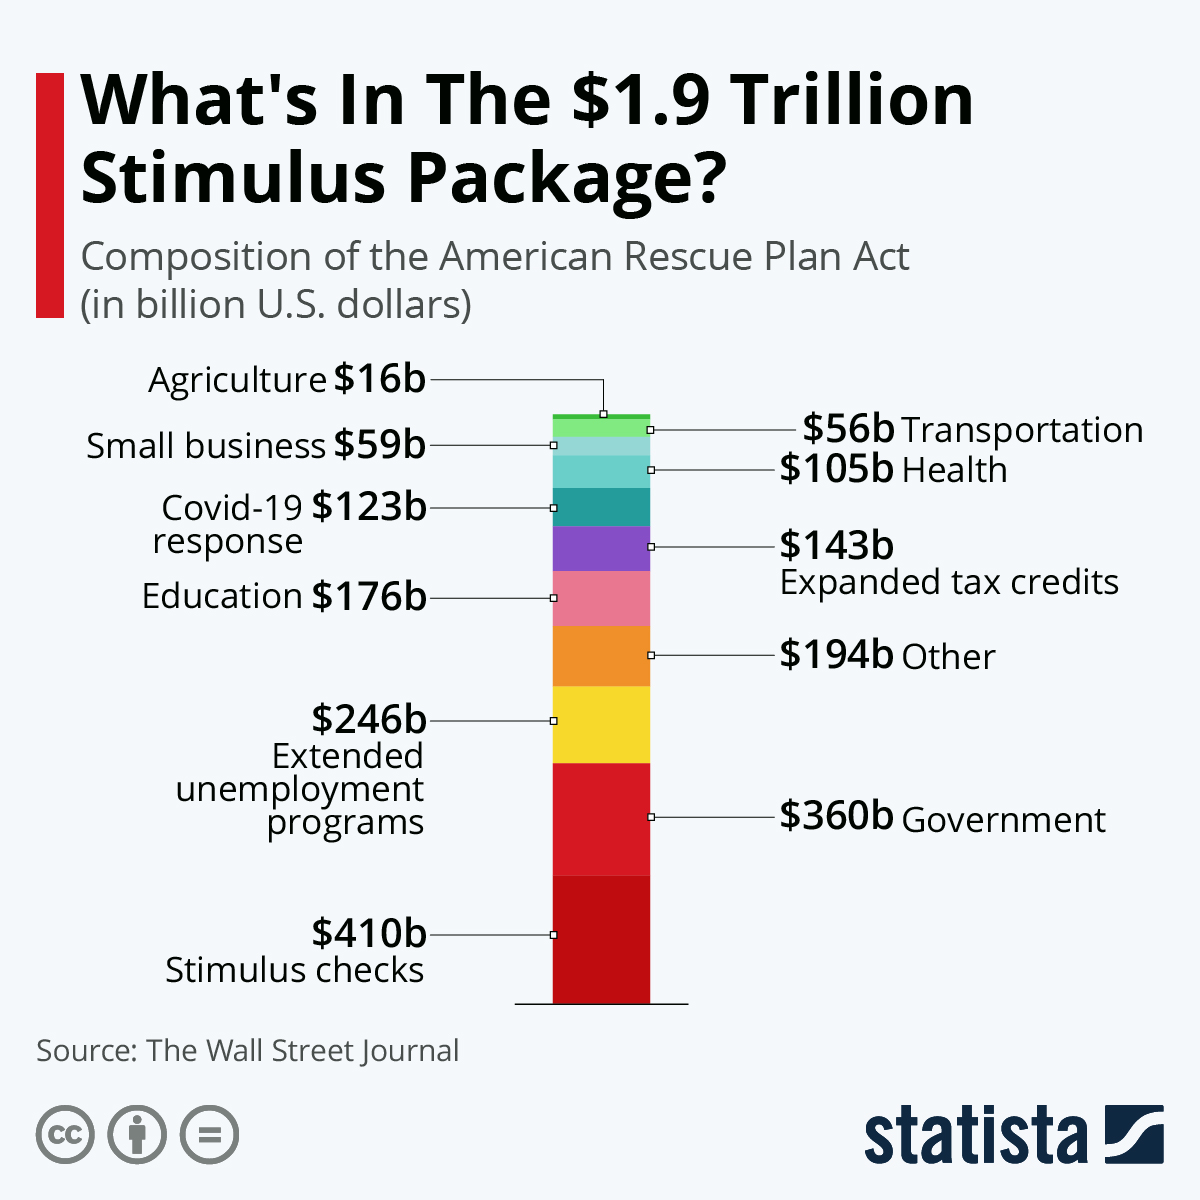 What's In The $1.9 Trillion Stimulus Package?